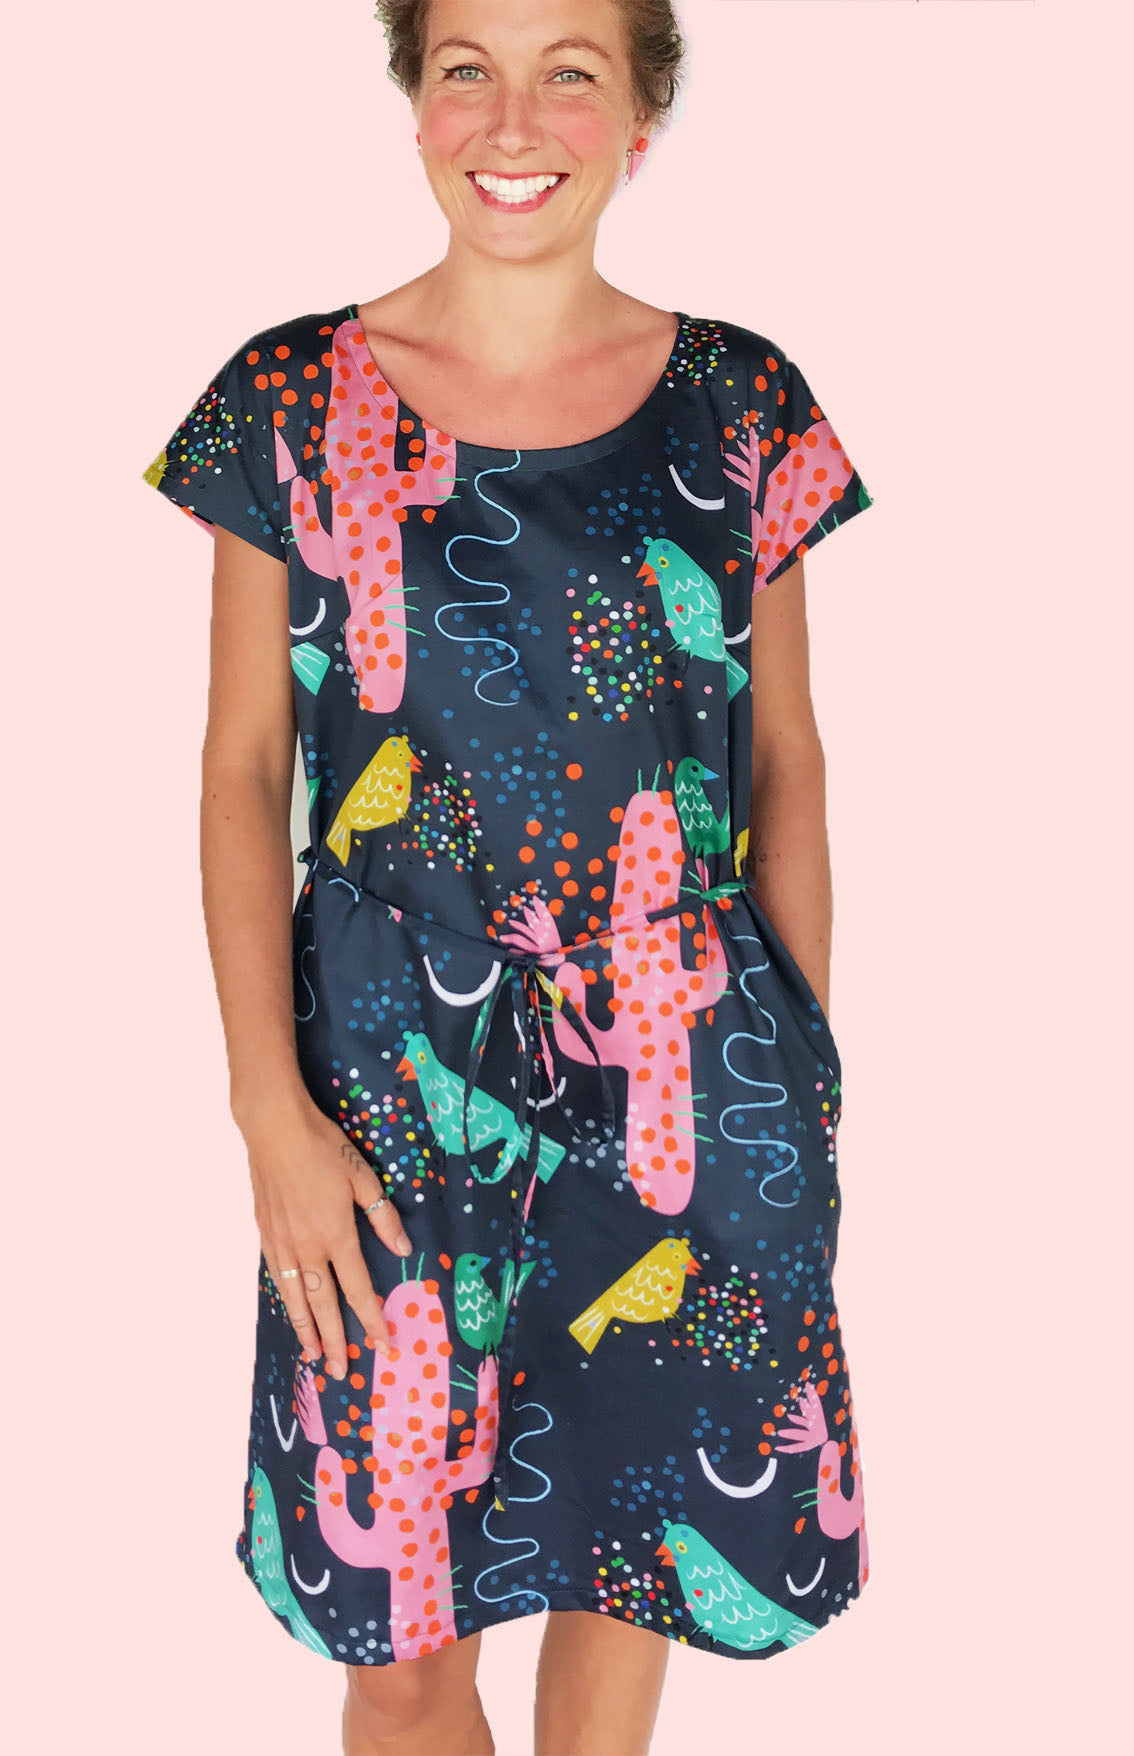 Prickly Feathers 100% organic cotton dress (550882443294)